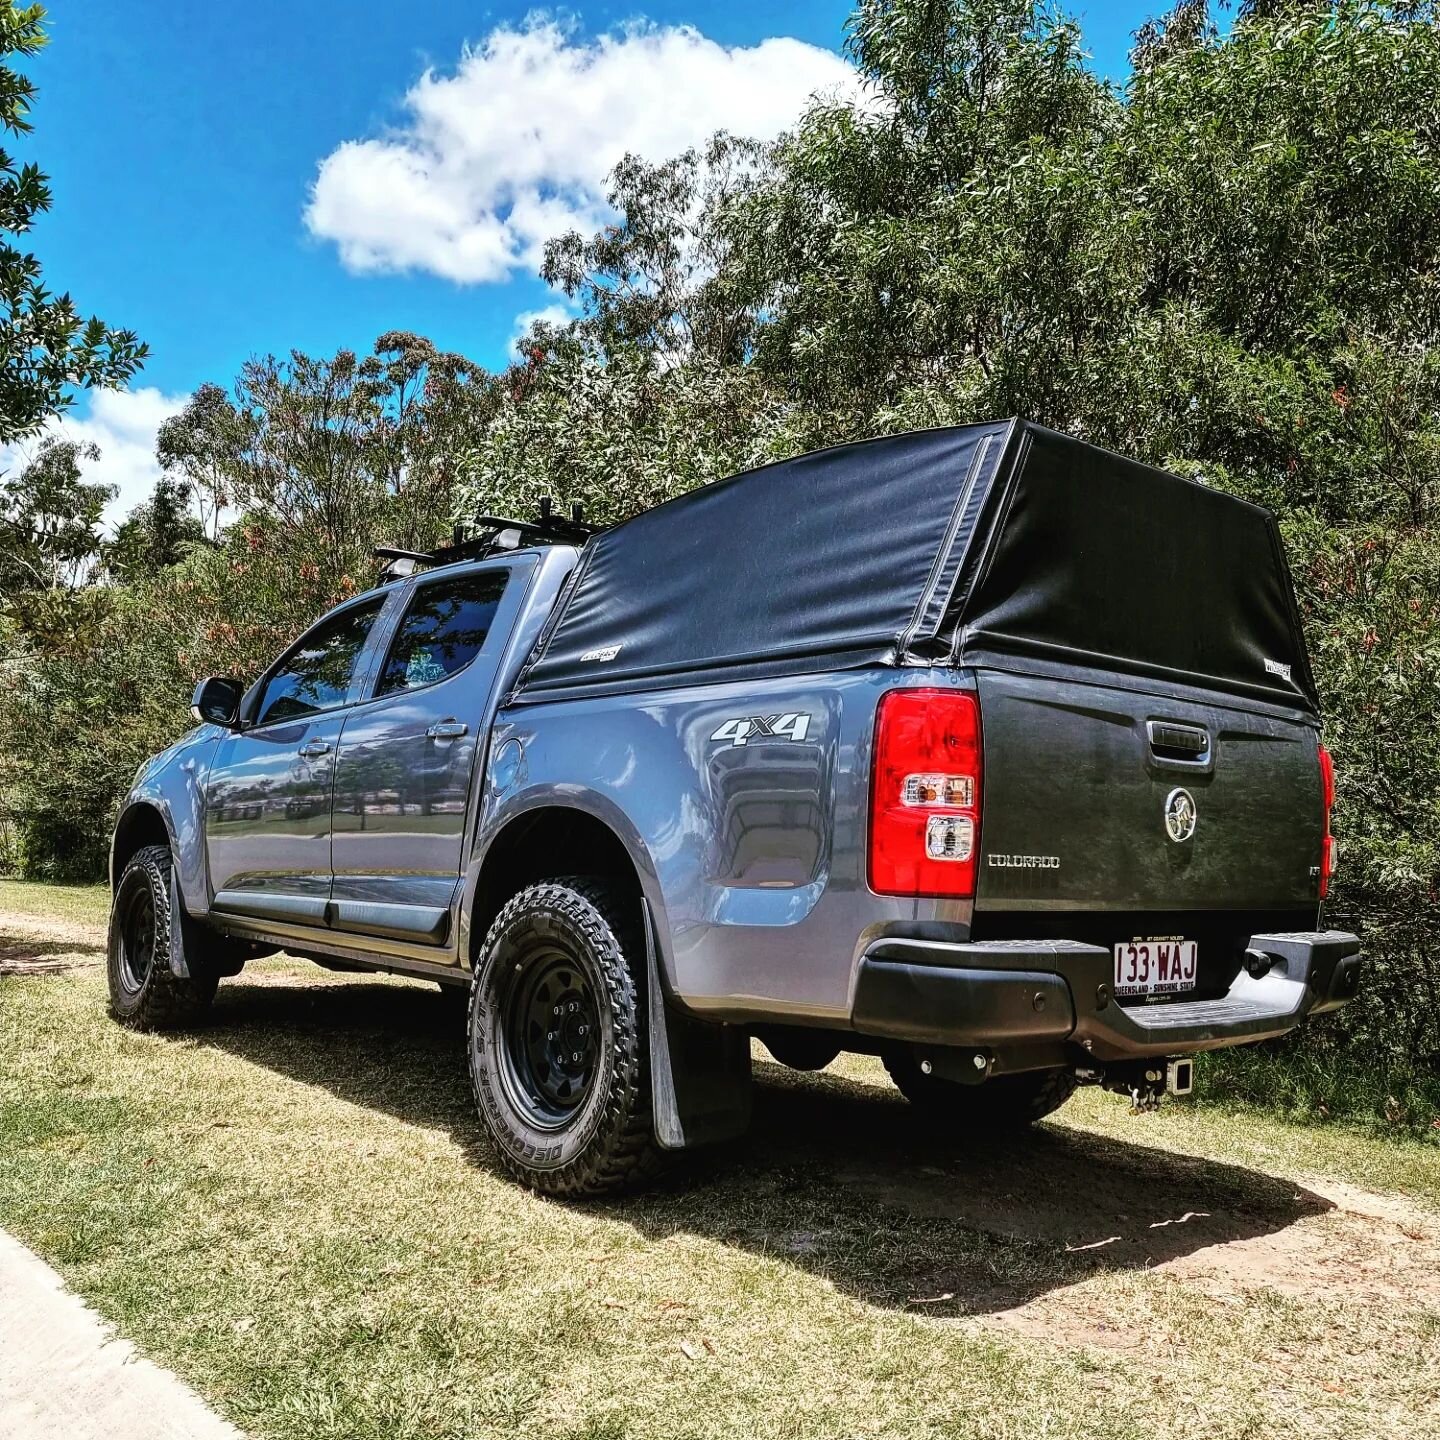 This colorado came to us to level out the vehicle without too much lift. 

@outbackarmour fully adjustable front struts
@airbagmansuspension load helpers in the back 
@teralumeindustries canopy light
@redarc bcdc wired into the removable battery box 